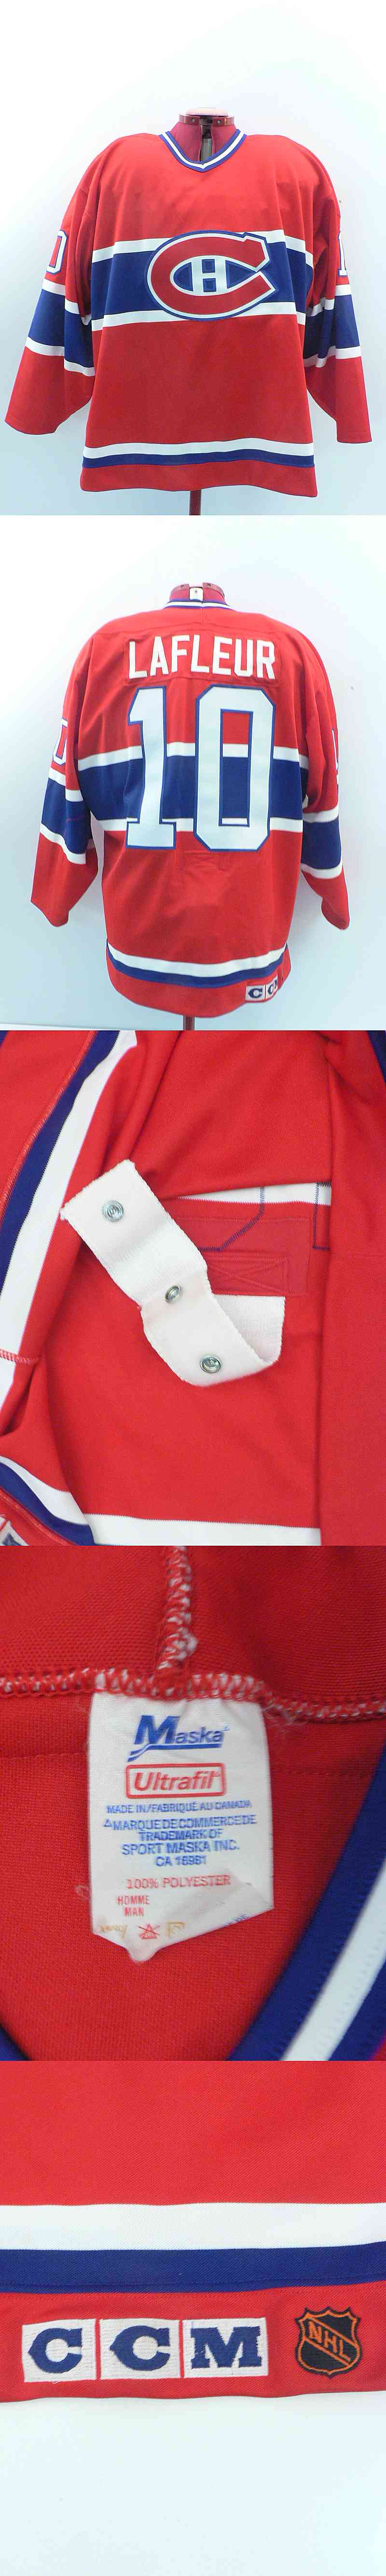 1980'S MONTREAL CANADIENS GUY LAFLEUR GAME JERSEY photo